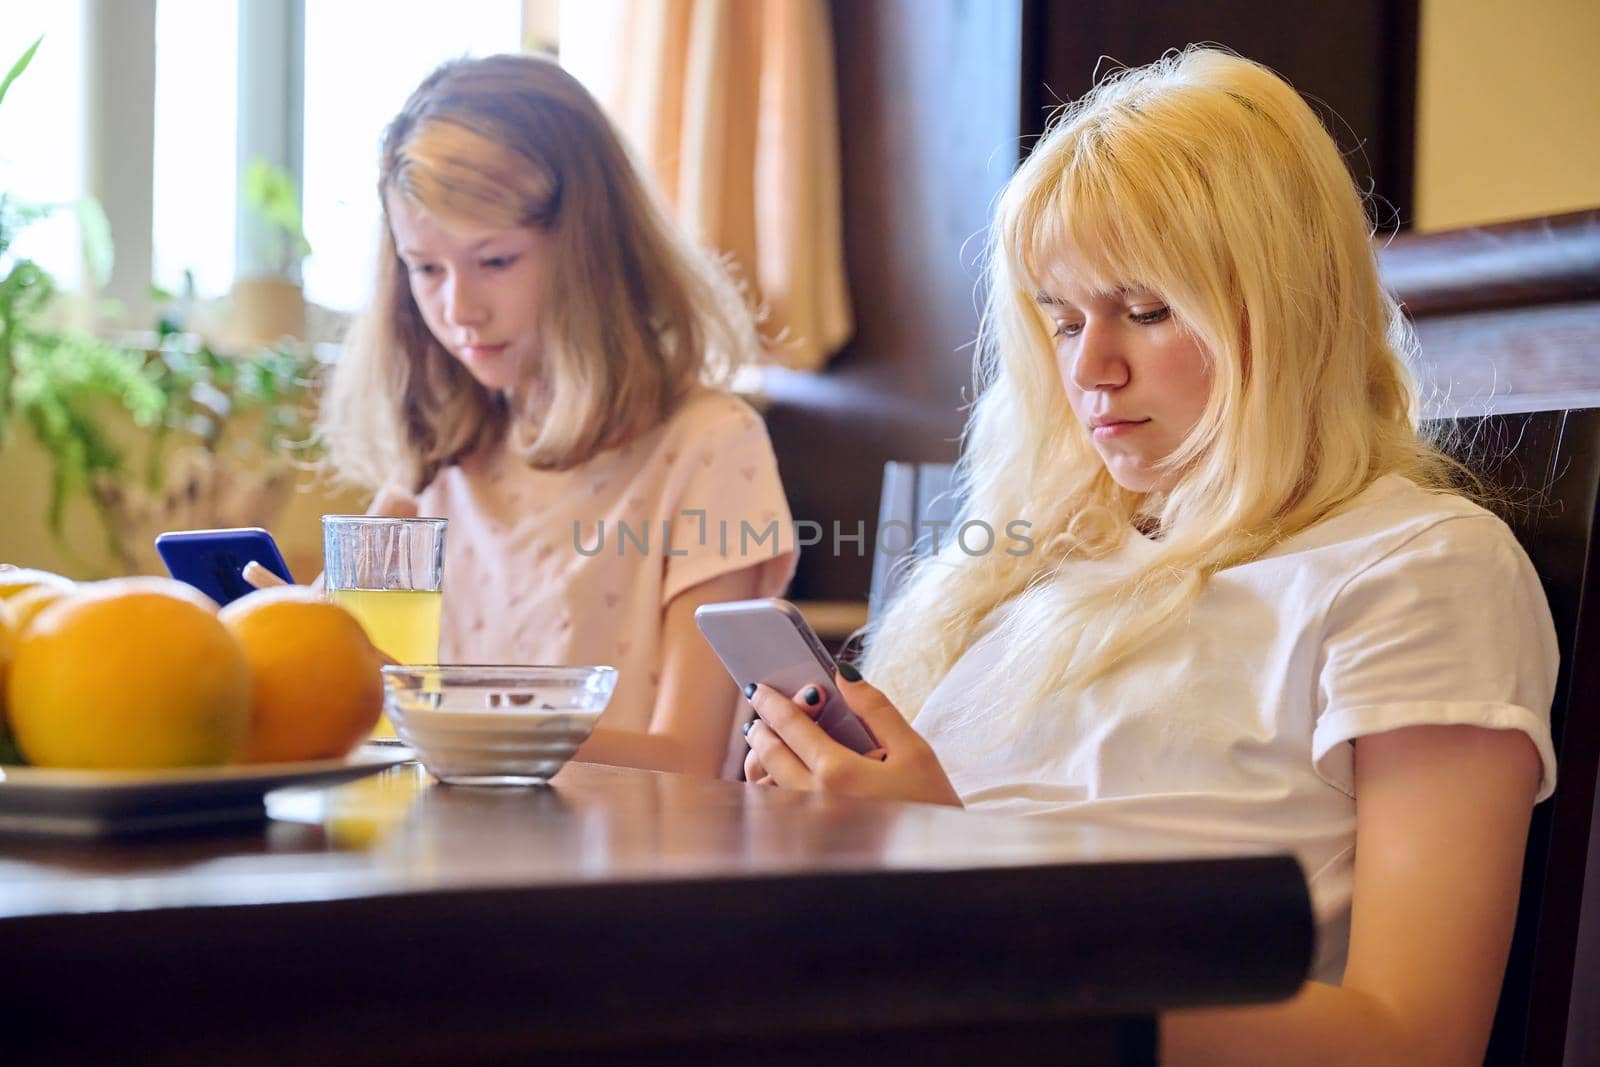 Children two girls sisters eating at home, looking at smartphones. Teenagers having breakfast in kitchen, using phones for leisure entertainment education. Technology in life lifestyle, adolescence